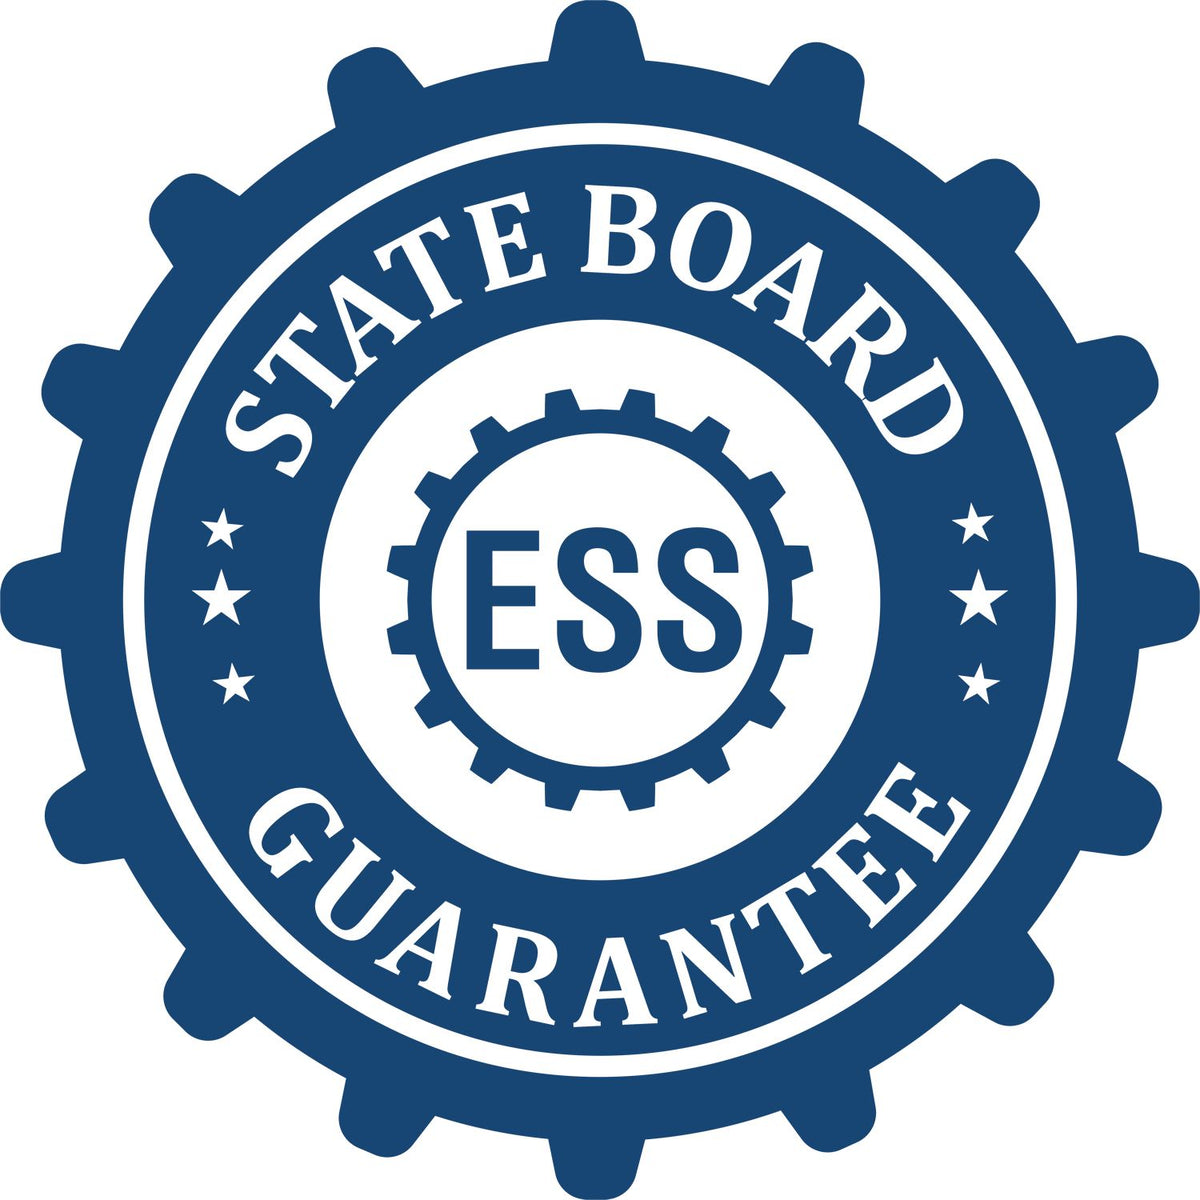 An emblem in a gear shape illustrating a state board guarantee for the Digital Connecticut PE Stamp and Electronic Seal for Connecticut Engineer product.